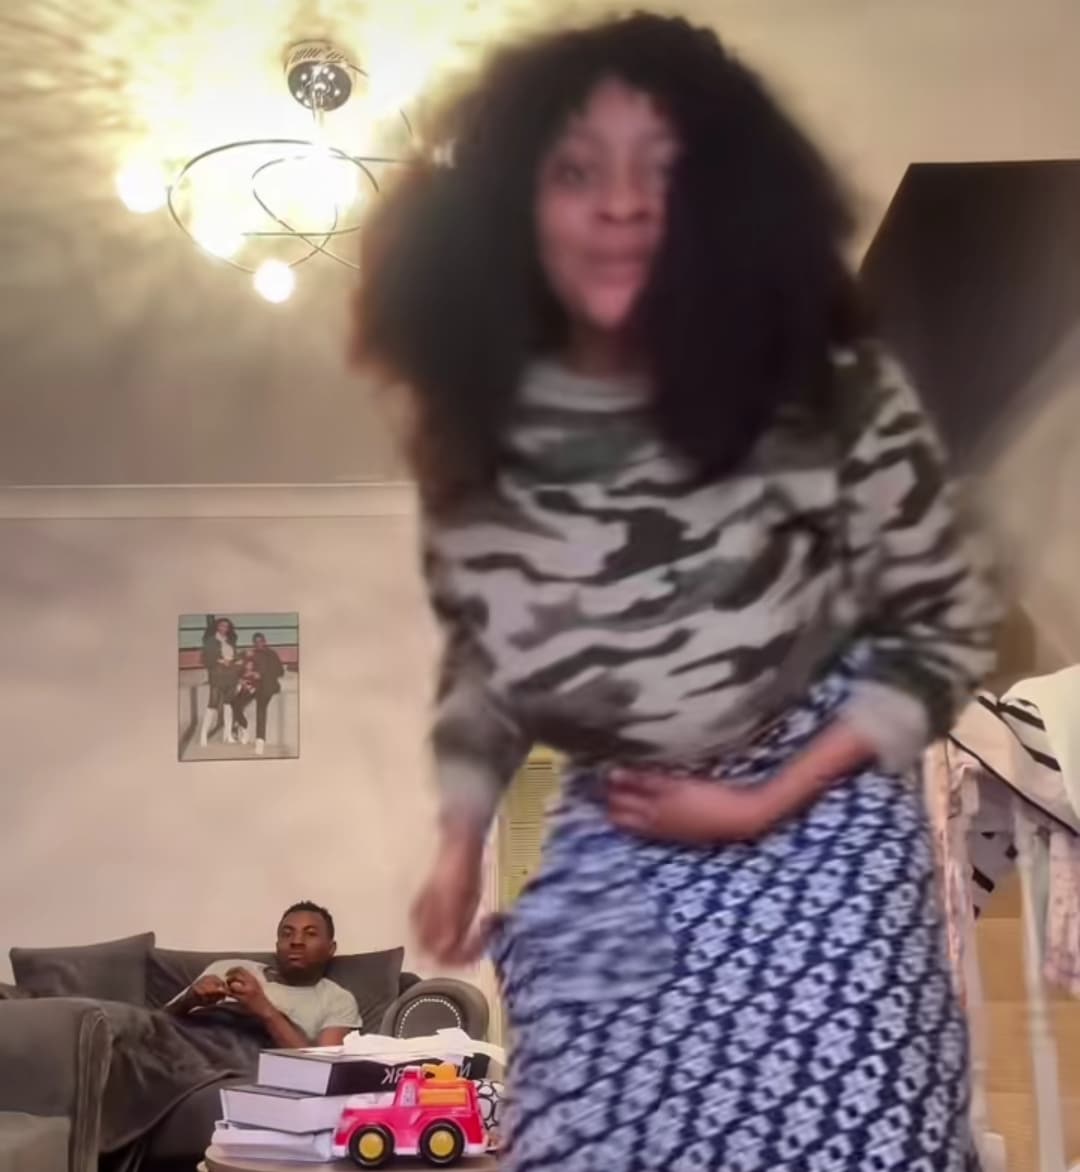 "I will have sense, when we get married" - Internet buzzes as Nigerian wife breaks 'sense' promise with playful dance